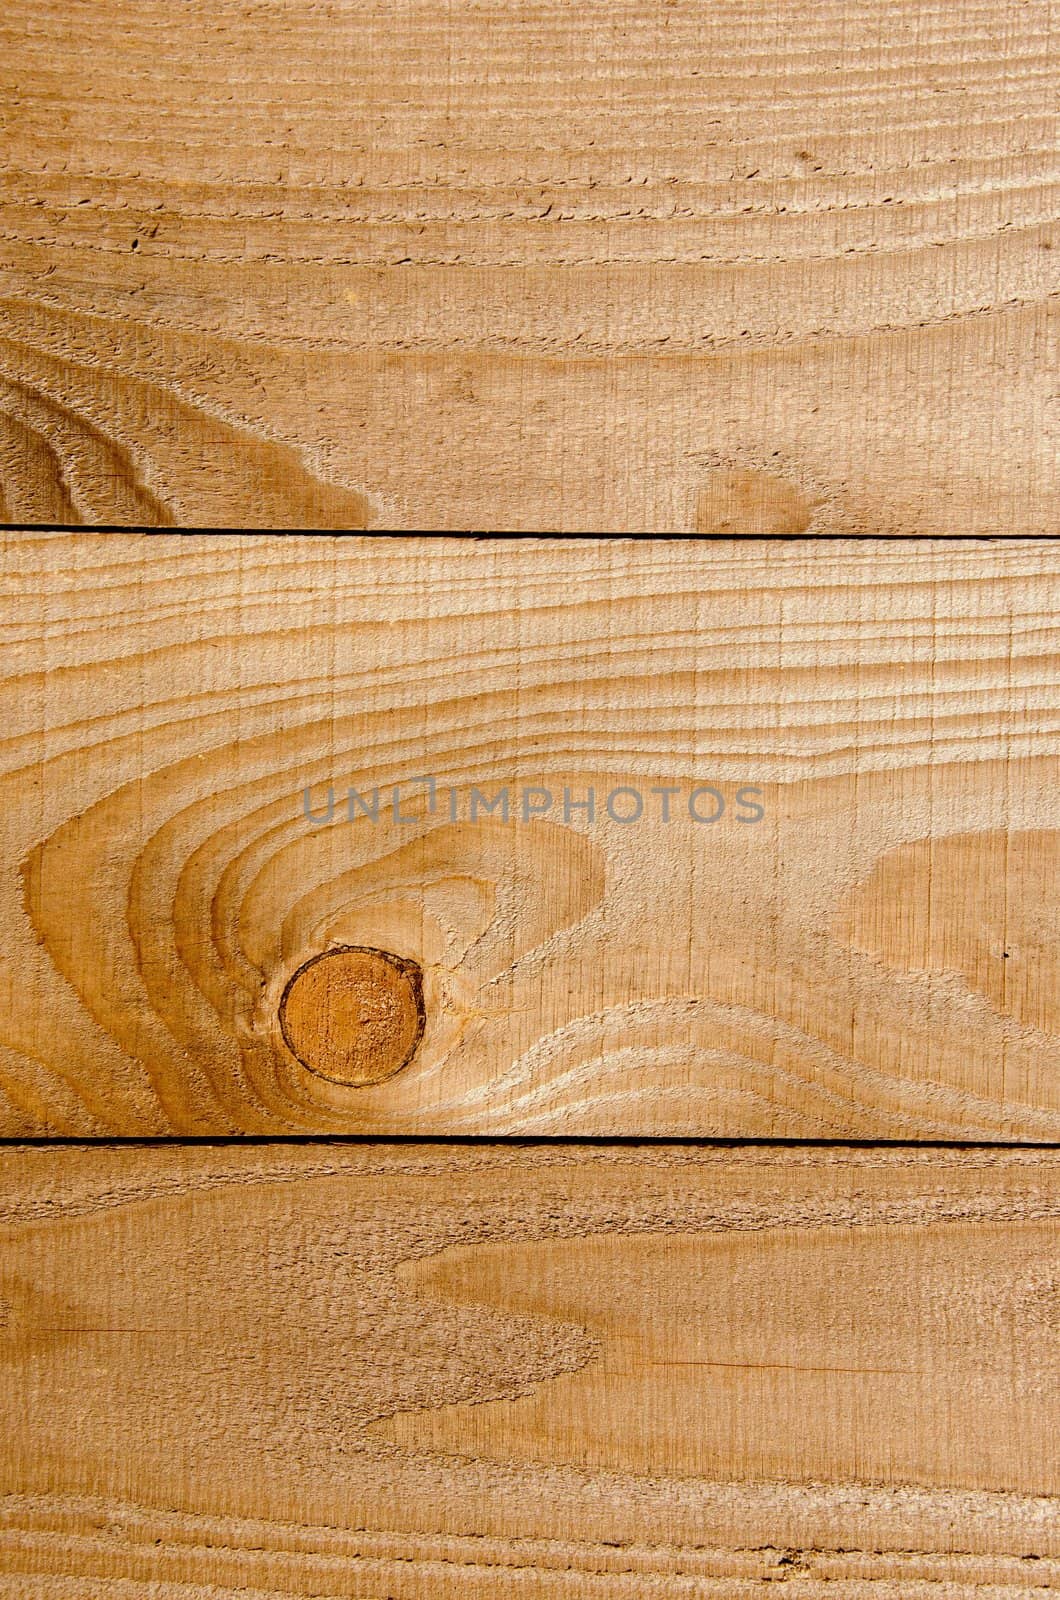 Wooden walls made of boards fragment. Simple architecture detail.